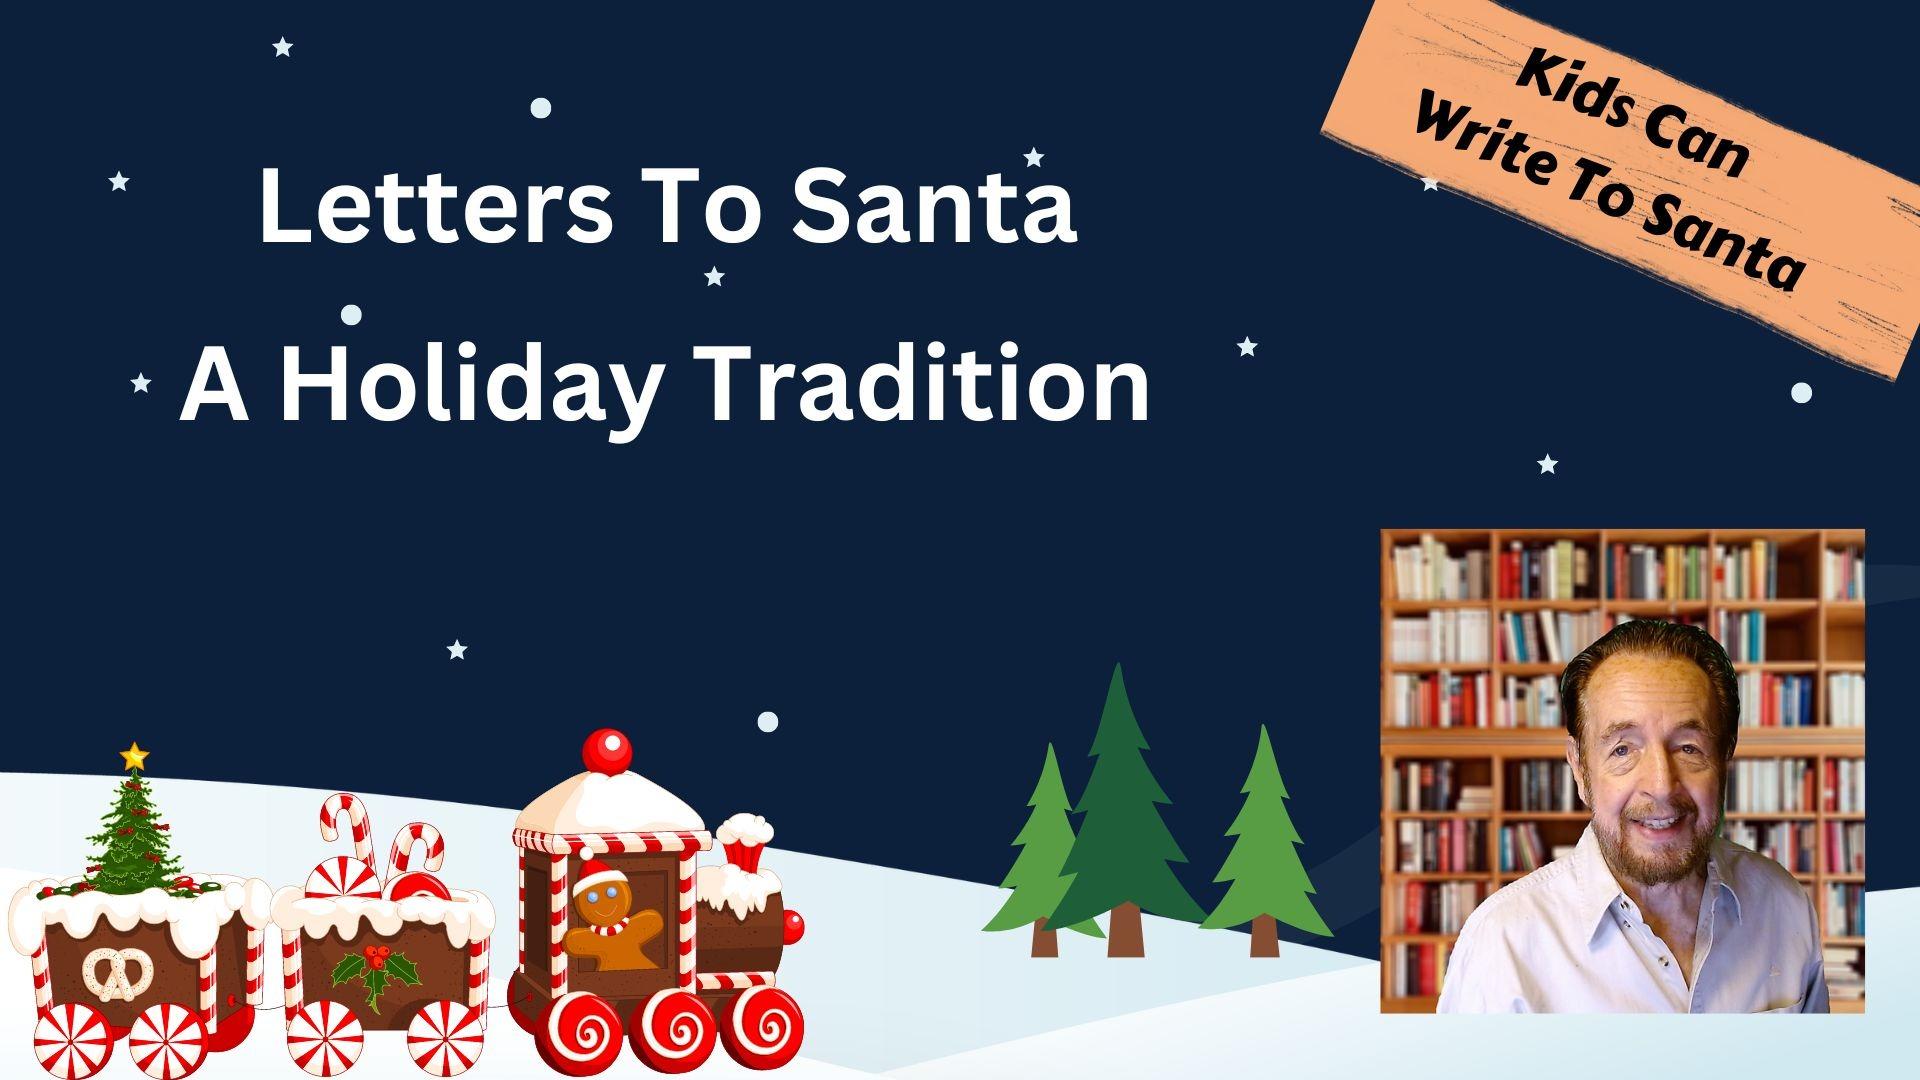 Letters To Santa - A Holiday Tradition